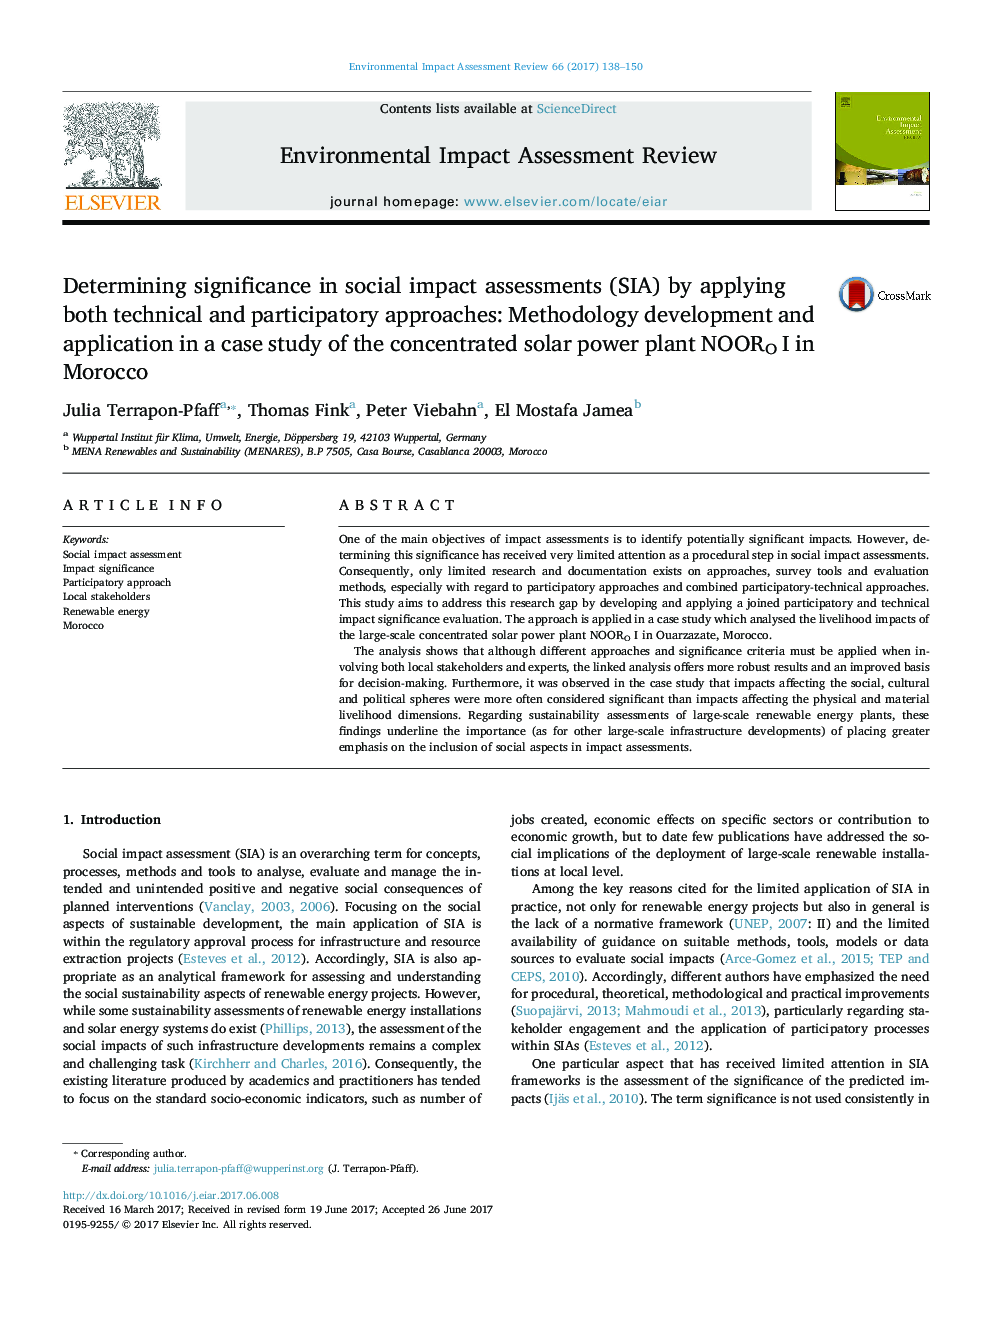 Determining significance in social impact assessments (SIA) by applying both technical and participatory approaches: Methodology development and application in a case study of the concentrated solar power plant NOORO I in Morocco